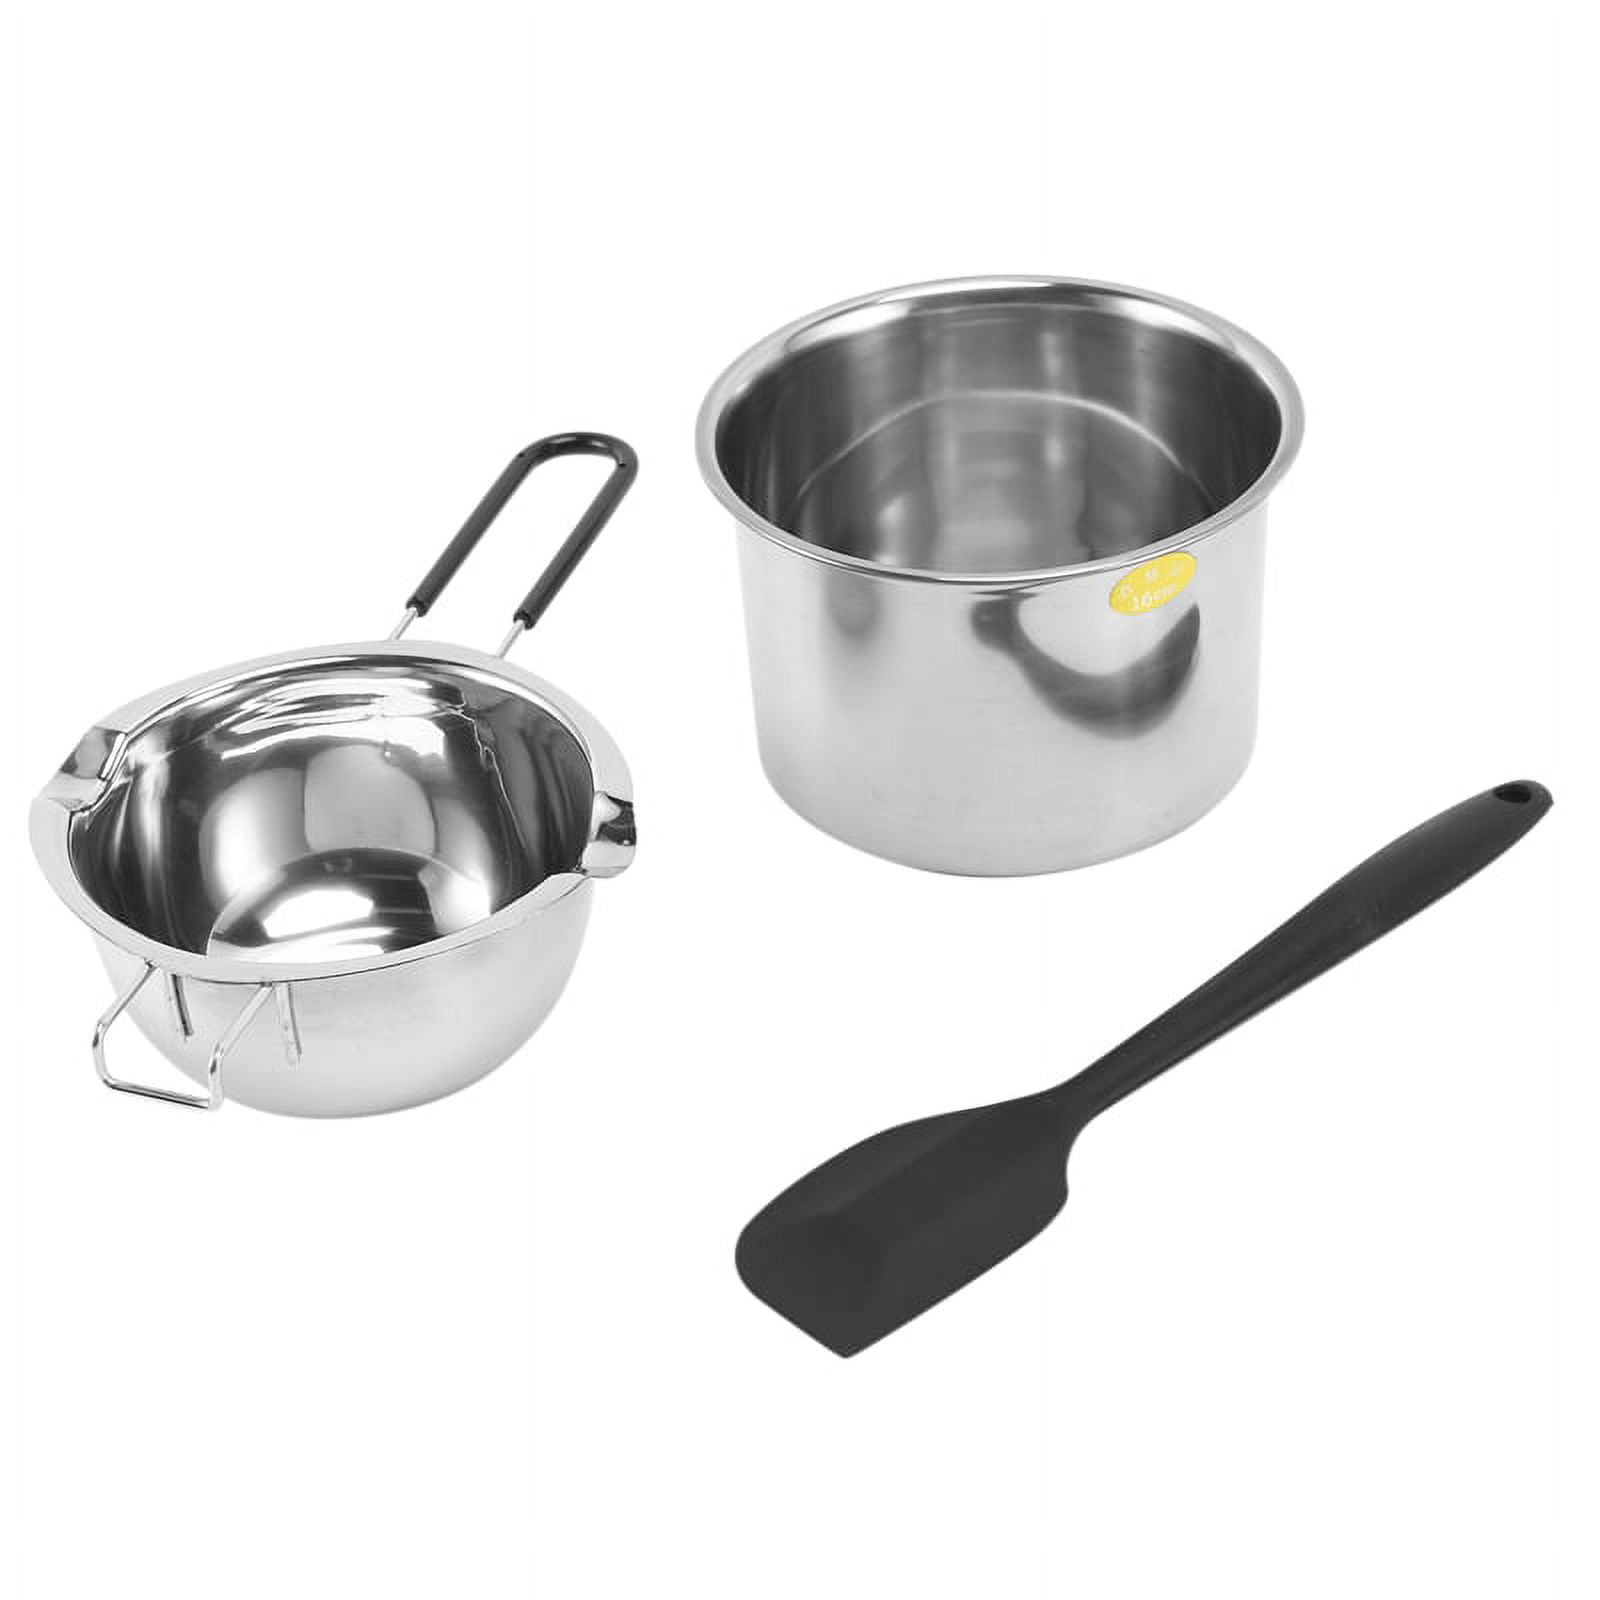 Buy True CandleMaking Pouring Pot with All-in-One Spatula